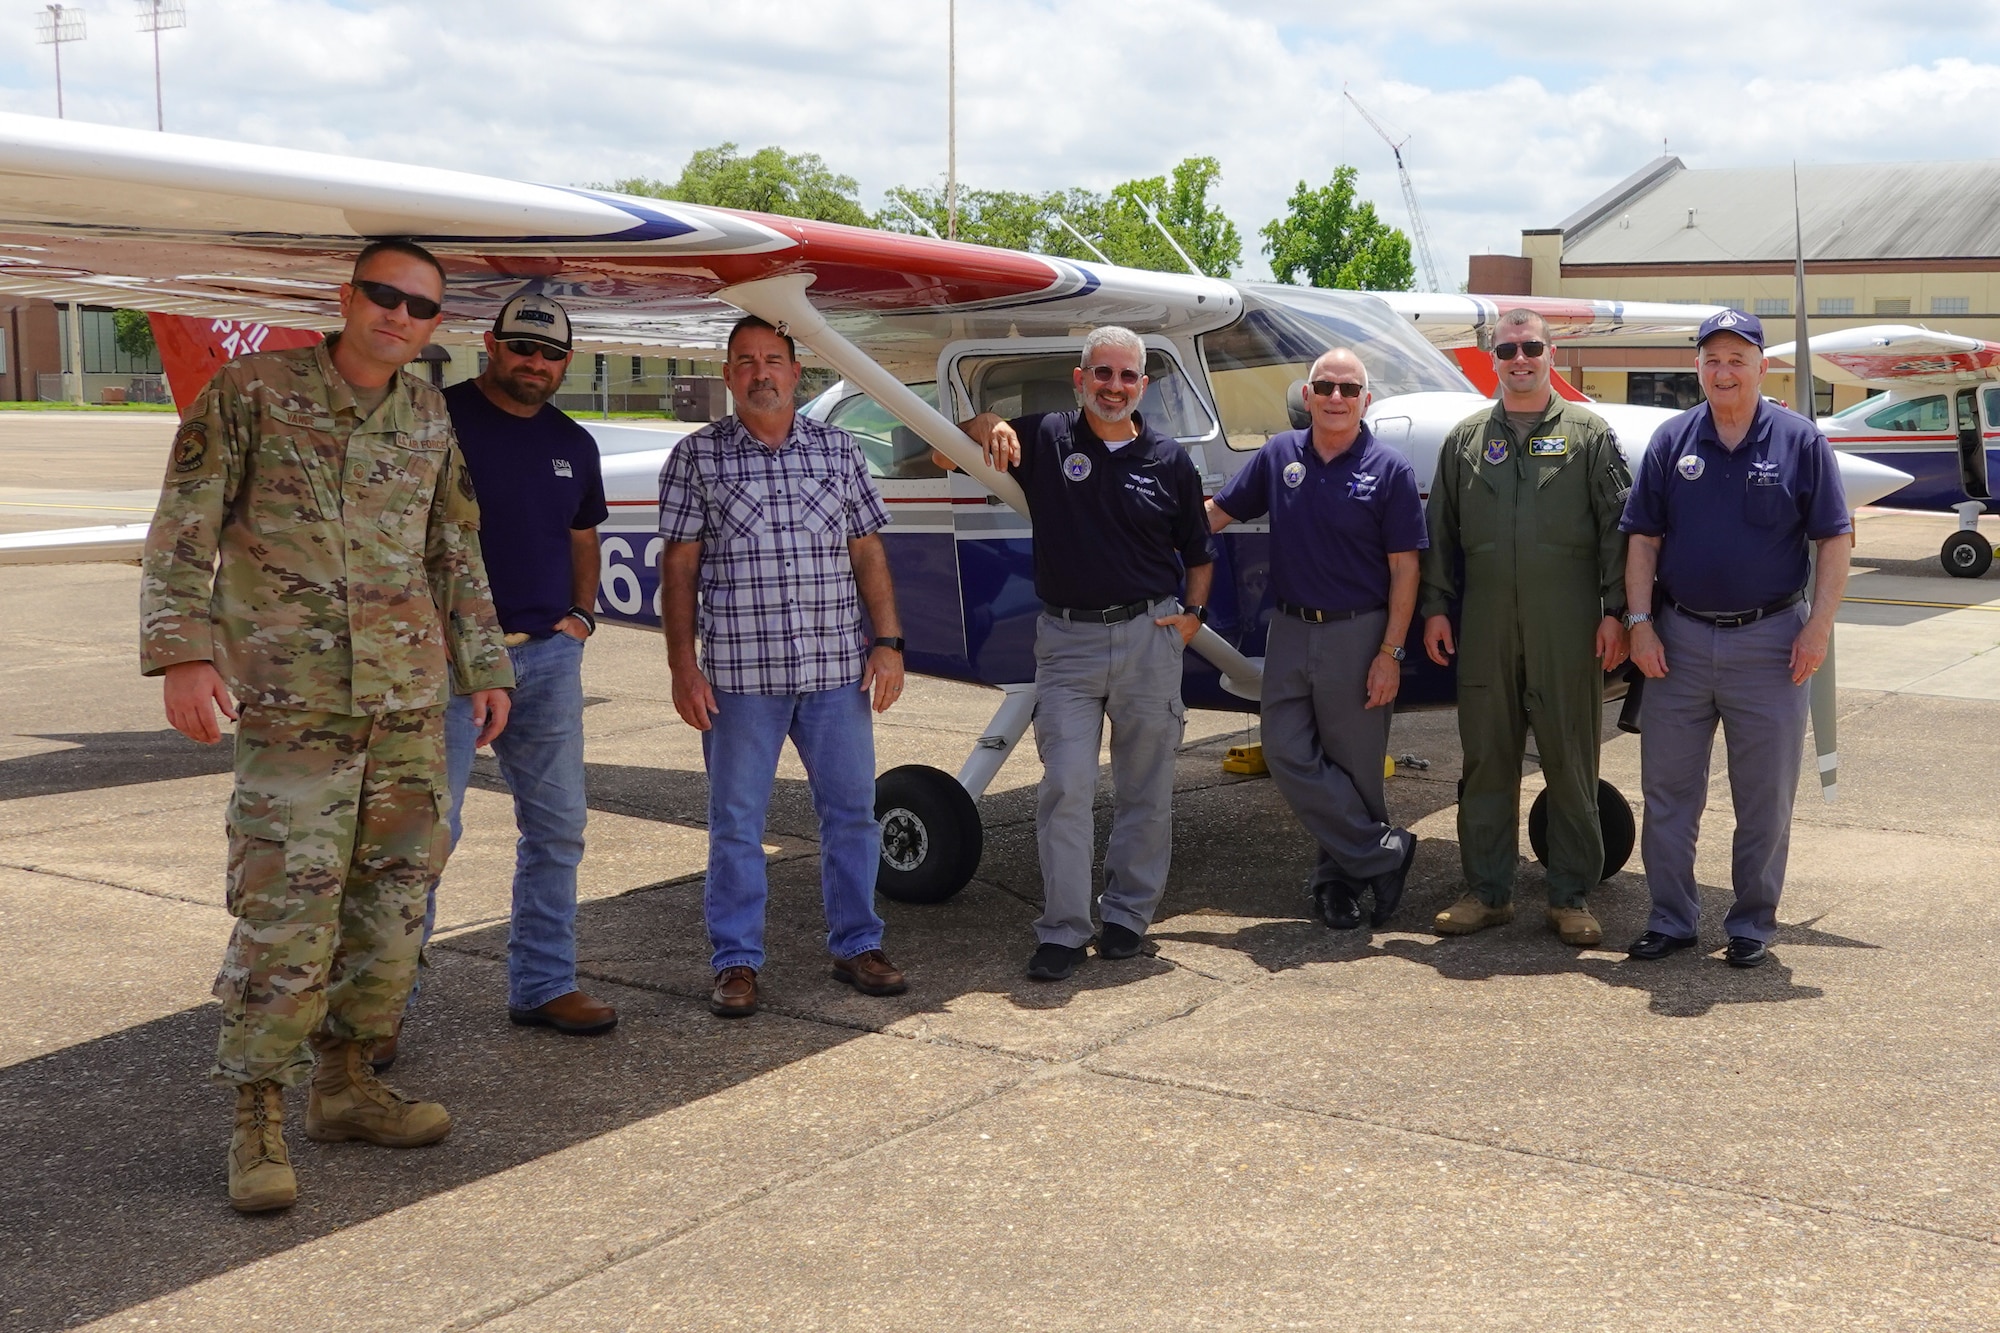 Airmen from the 2nd Bomb Wing flight safety office and members from the Shreveport Civil Air Patrol, pose for a photo at Barksdale Air Force Base during a Mid-Air Collision Avoidance safety training May 28, 2021. MACA is a program where members of the flight safety office travel to various airports spreading general awareness of hazards in the area, educating local aviators by answering their questions and avoiding mid-air collisions through preparedness. (Courtesy photo by Capt. Dustin Martin)